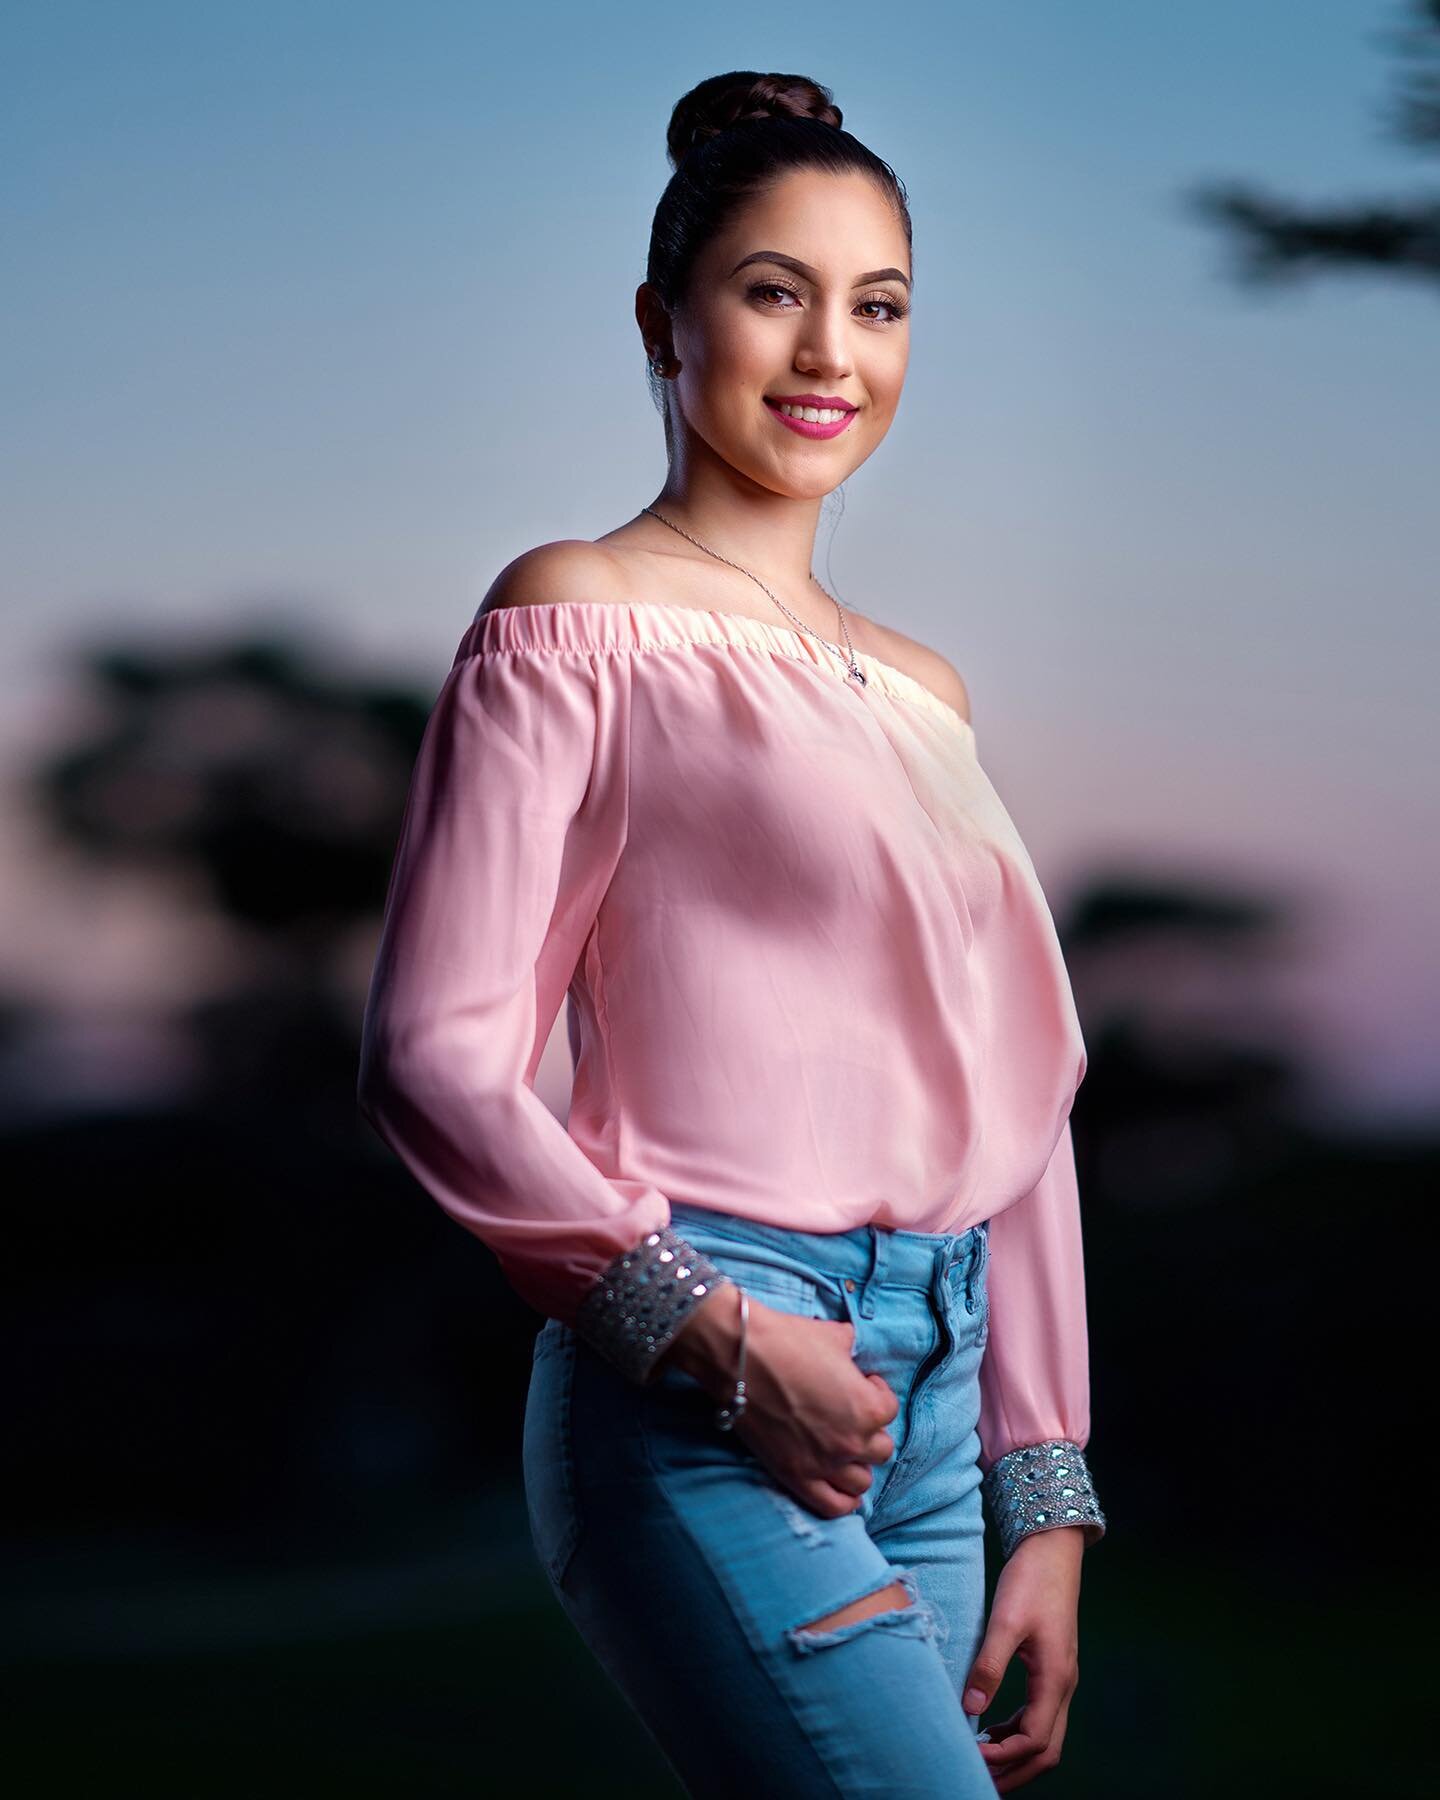 When the shoot is already done, but you see the sky glow w/ amazing colors so you ask the subject to spare a few more minutes, haha. That happened here. Got so lucky the sky matched her outfit!🔥
..
Swipe left for extra helpful stuff! 📸
..
Photos:
1